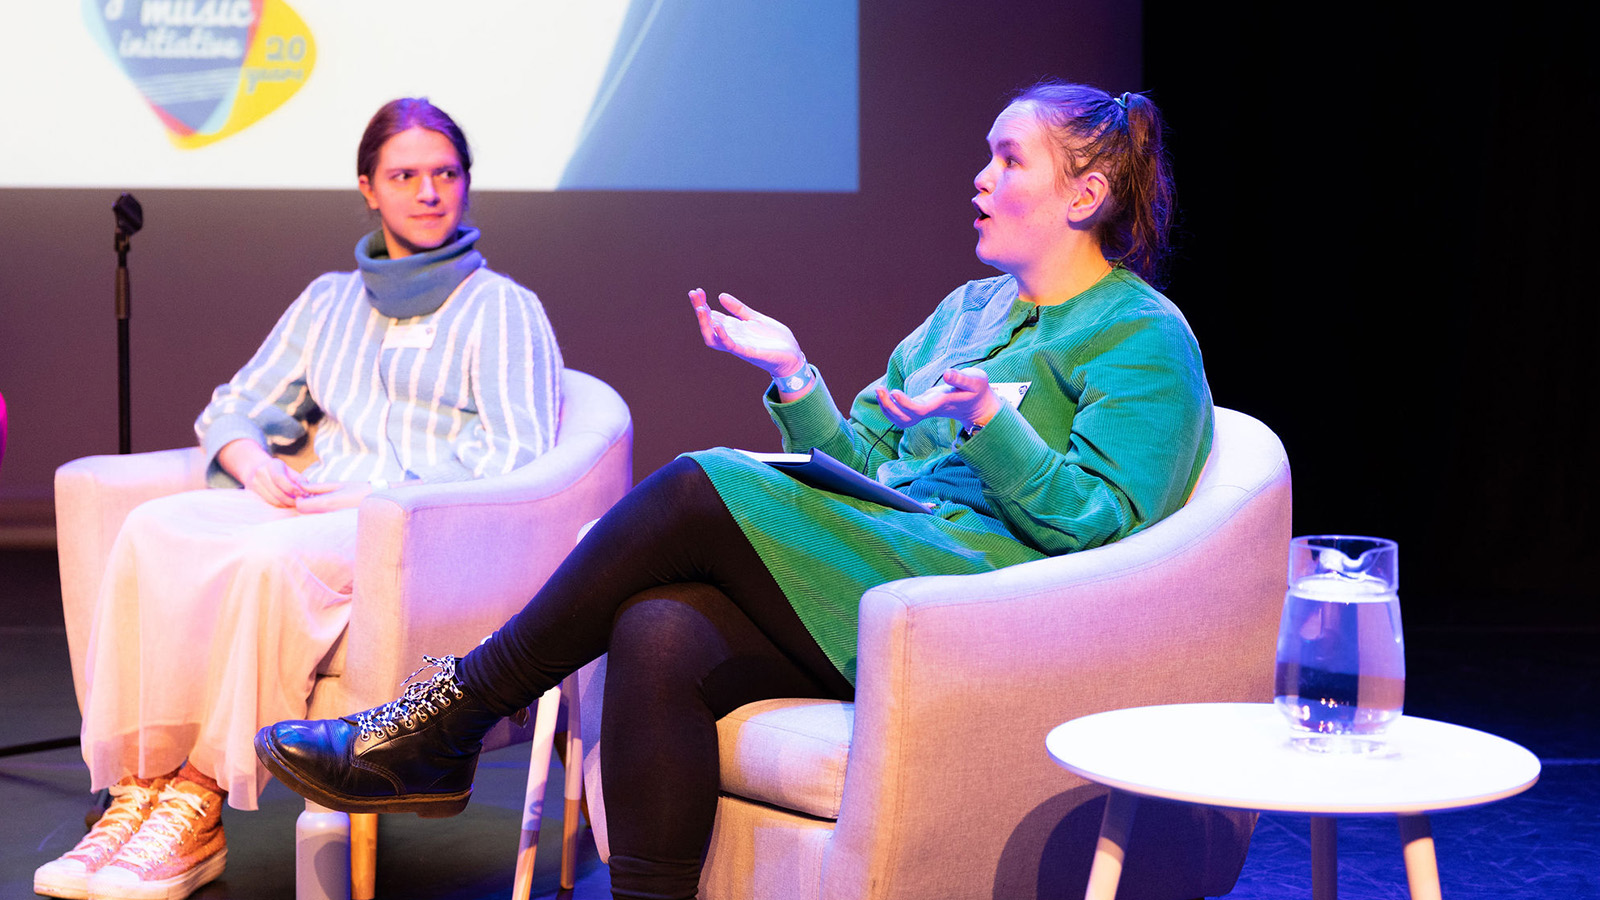 Malin Lewis on the right and Geraldine Heaney on the left, seated on armchairs during an event onstage